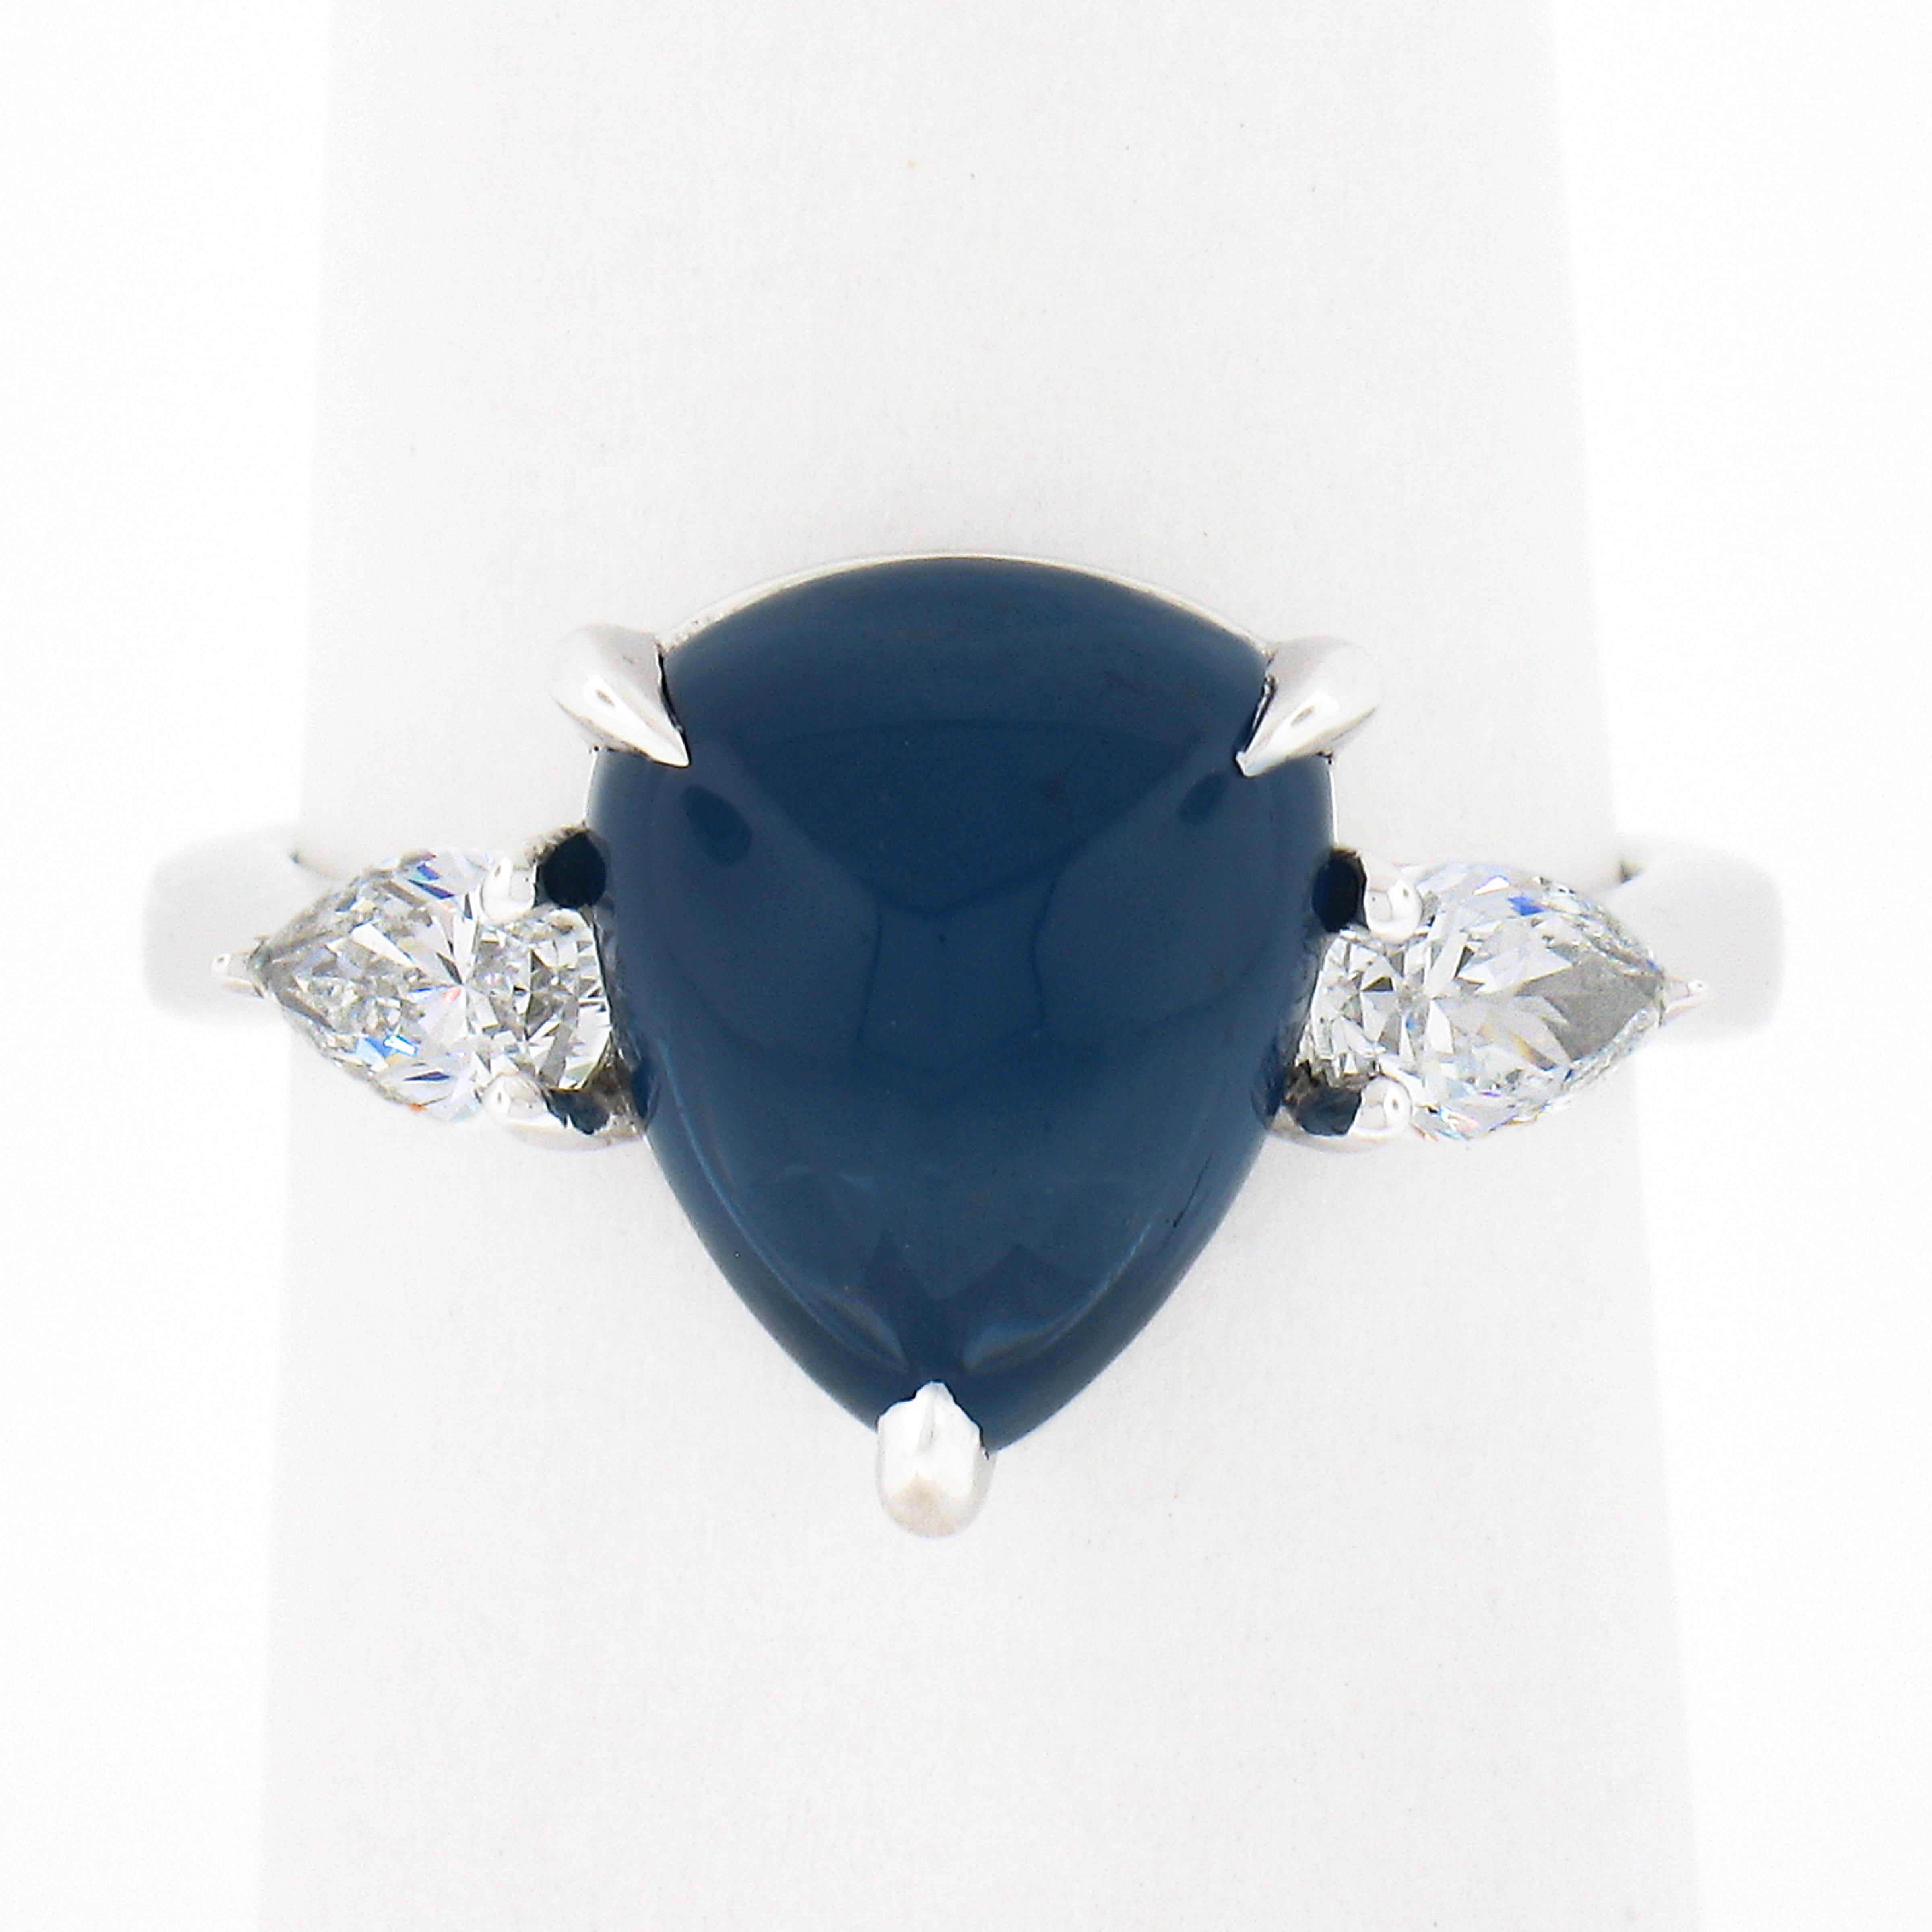 This uniquely designed and very well made three-stone ring is newly crafted in solid platinum and features a magnificent, Gubelin certified, natural sapphire stone perfectly claw-prong set at its center. The modified triangle cabochon cut sapphire